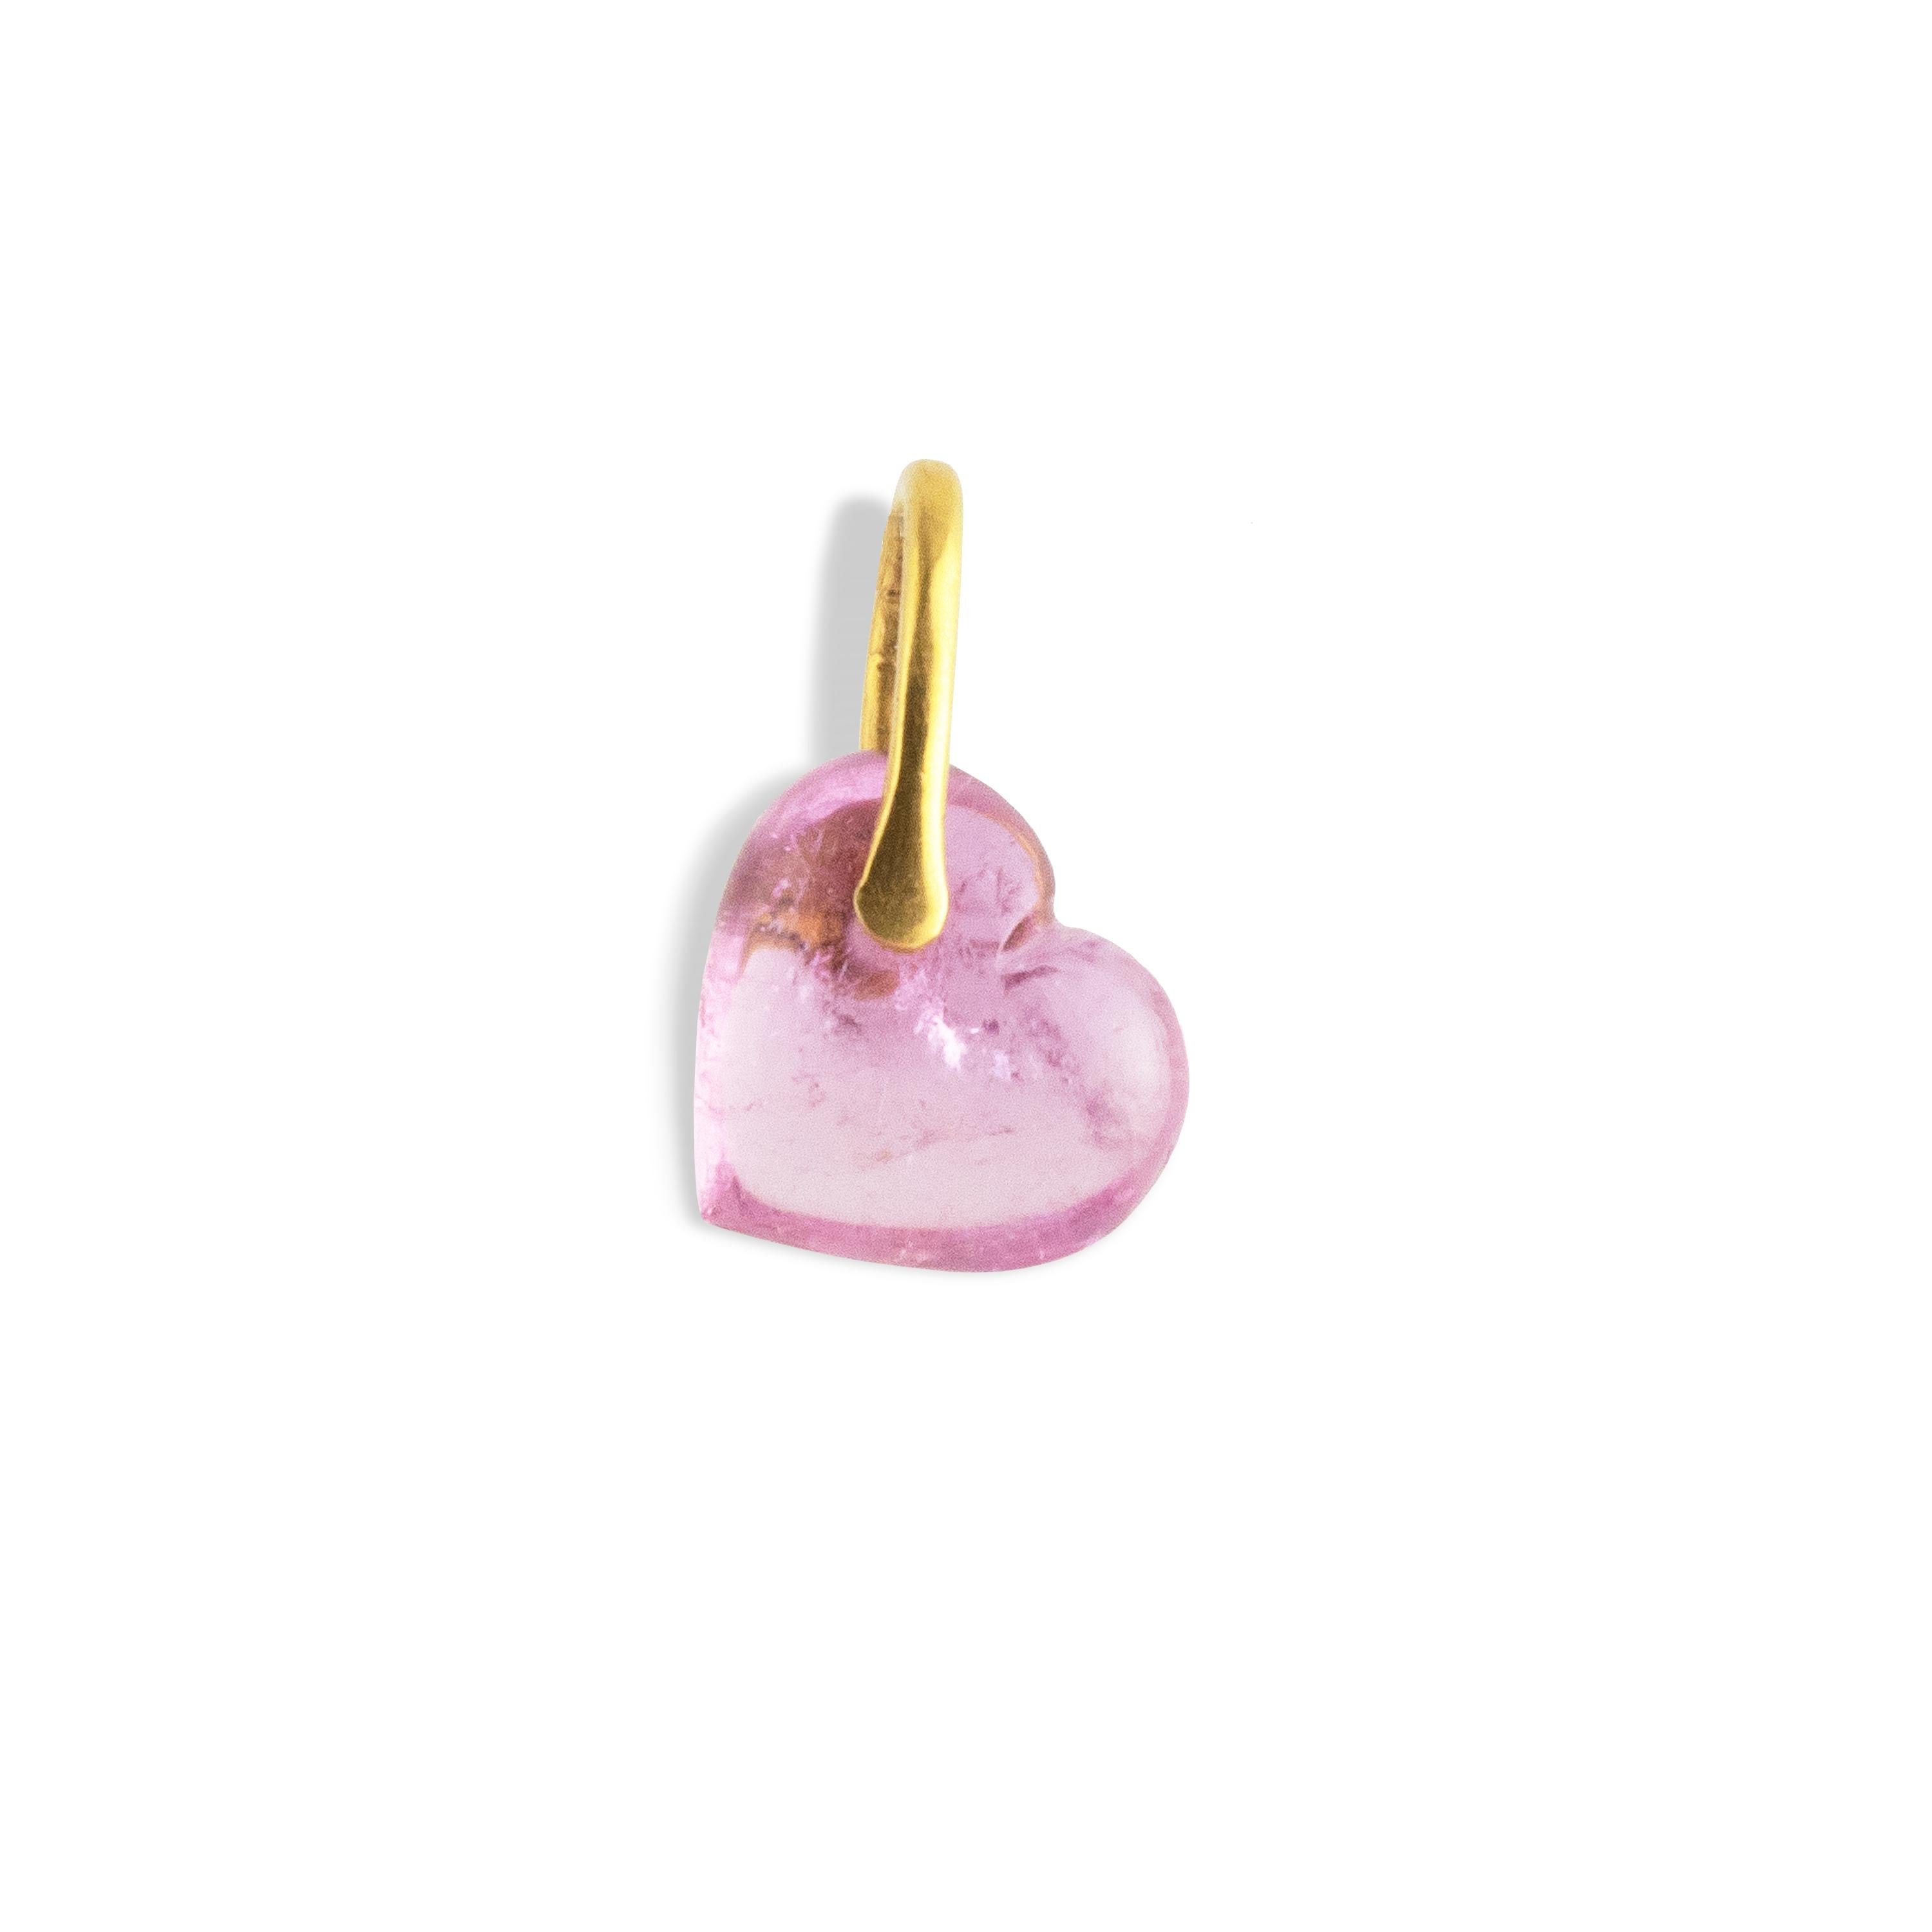 This  12mm pink tourmaline puffy heart pendant is hand carved and set with a 22k gold bale.   Measures 17mm x 11mm x 5mm. It hangs on an 18' Cable Chain.
Hand carved in Jaipur, India.

Pink Tourmaline is a stone of love, compassion, emotional